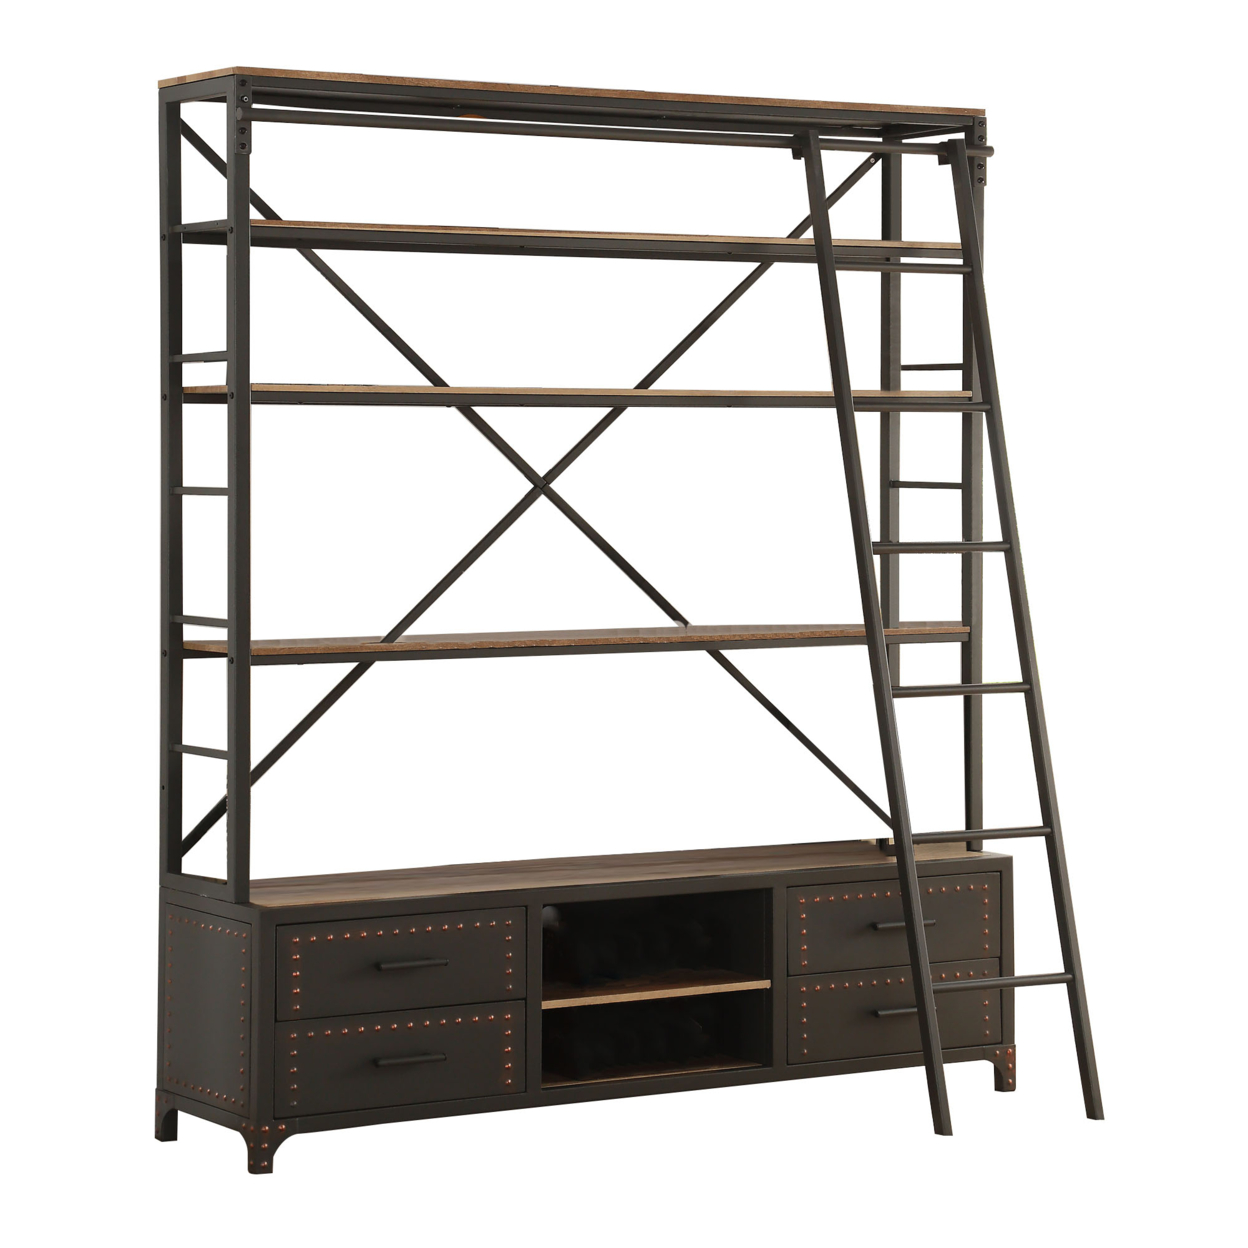 Wood And Metal Bookshelf With Built In Sliding Ladder, Gray And Brown- Saltoro Sherpi